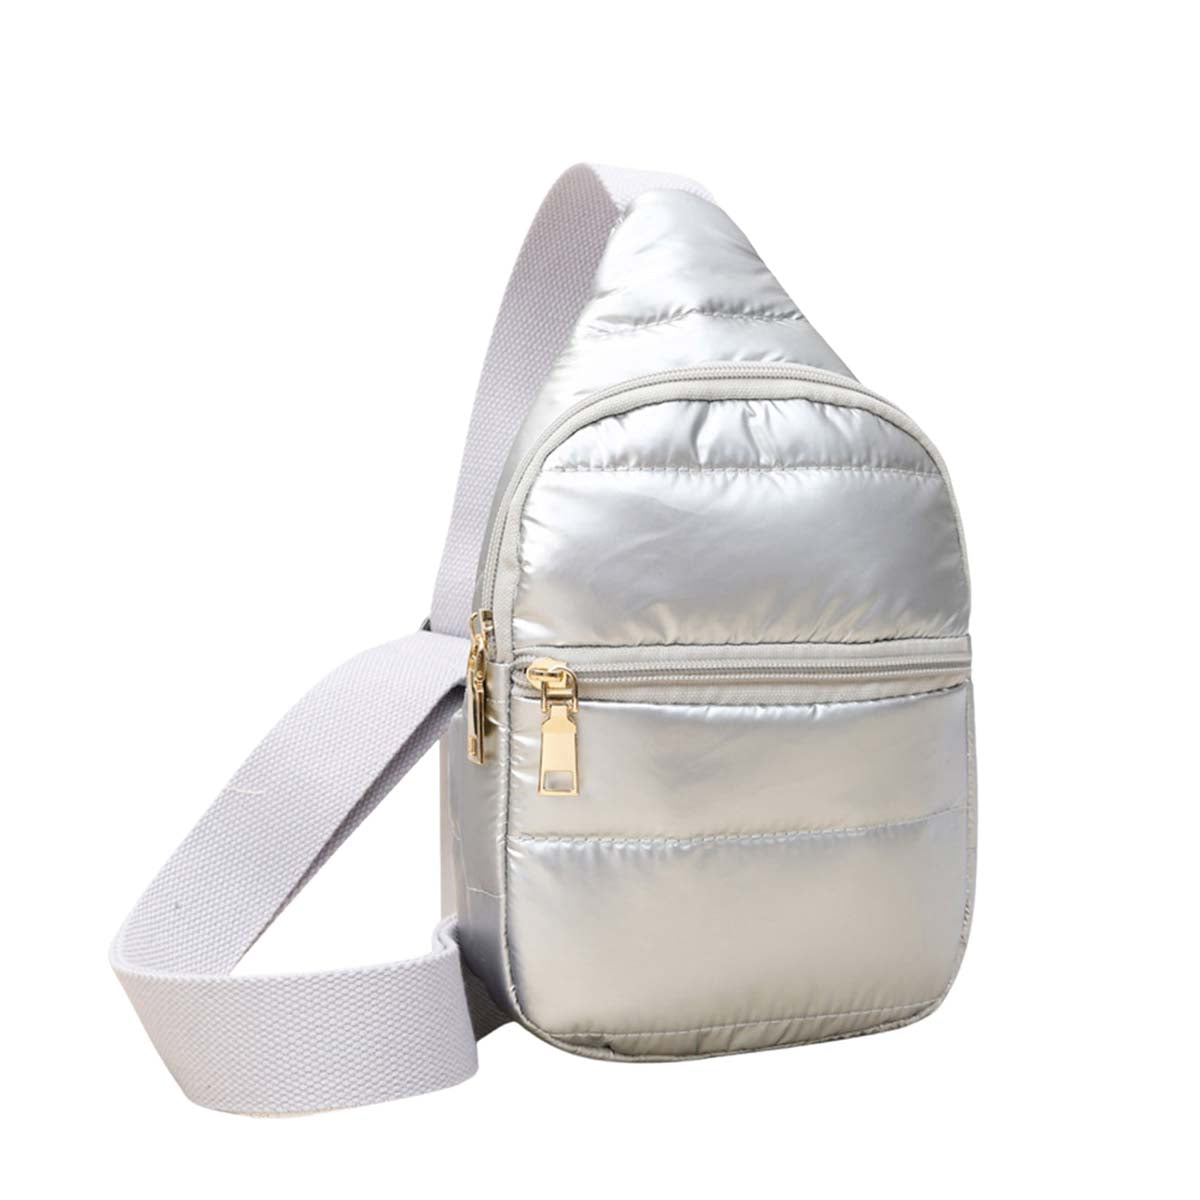 Silver Solid Puffer Mini Sling Bag, be the ultimate fashionista while carrying this Solid Puffer Sling bag in style. It's great for carrying small and handy things. Keep your keys handy & ready for opening doors as soon as you arrive. The adjustable lightweight features room to carry what you need for long walks or trips.